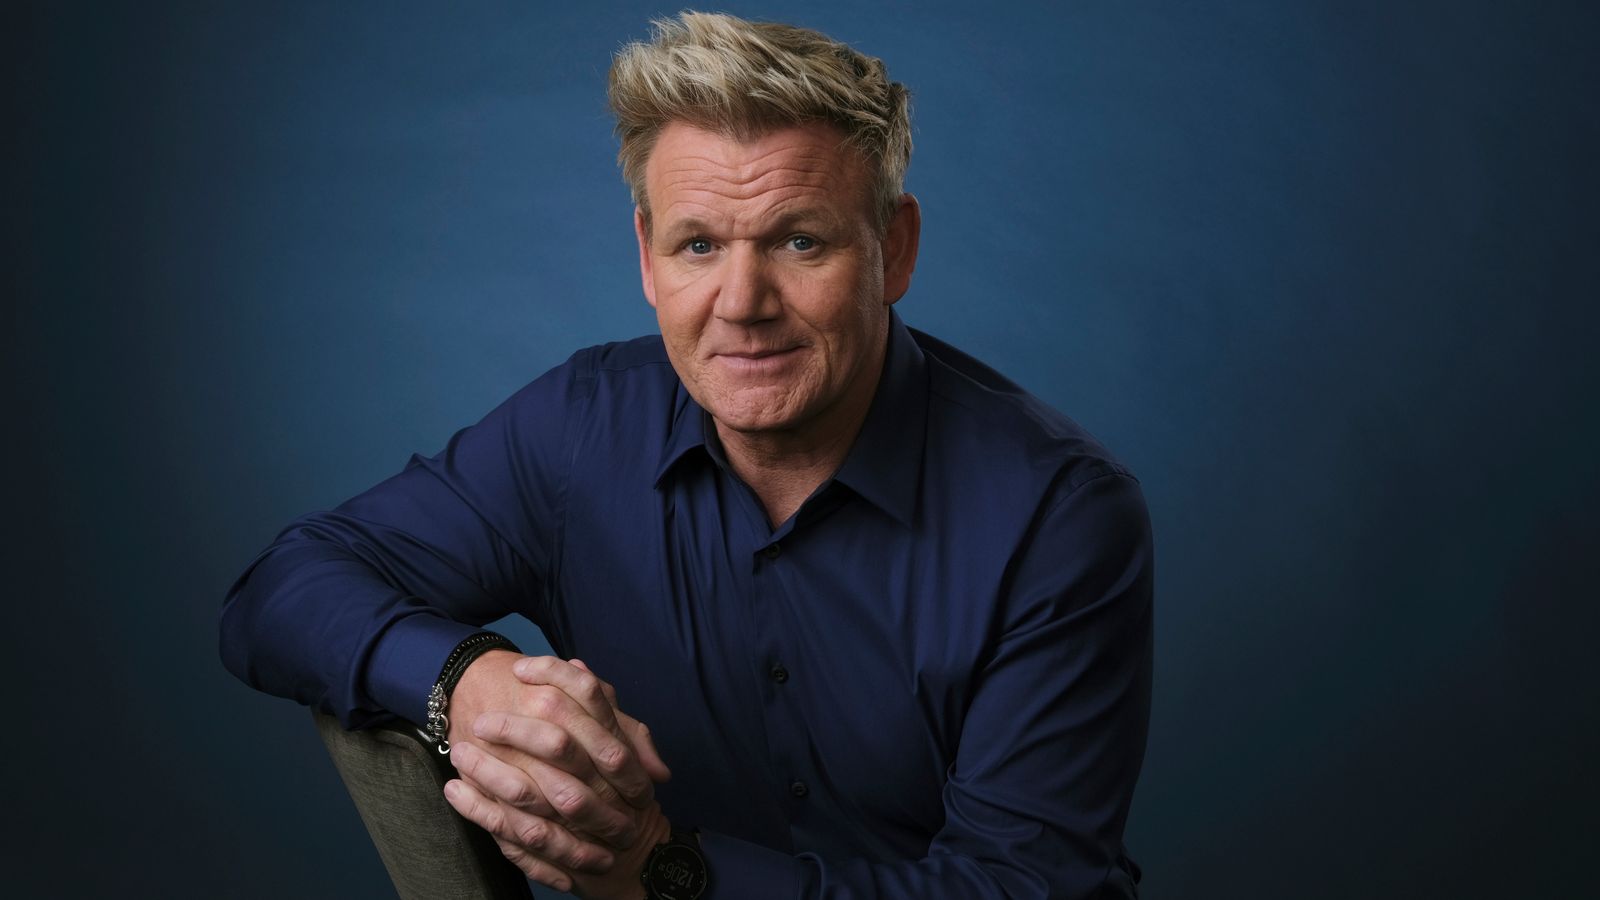 Gordon Ramsay's restaurant empire eyes inflation hit after annual losses grow to £6.8m